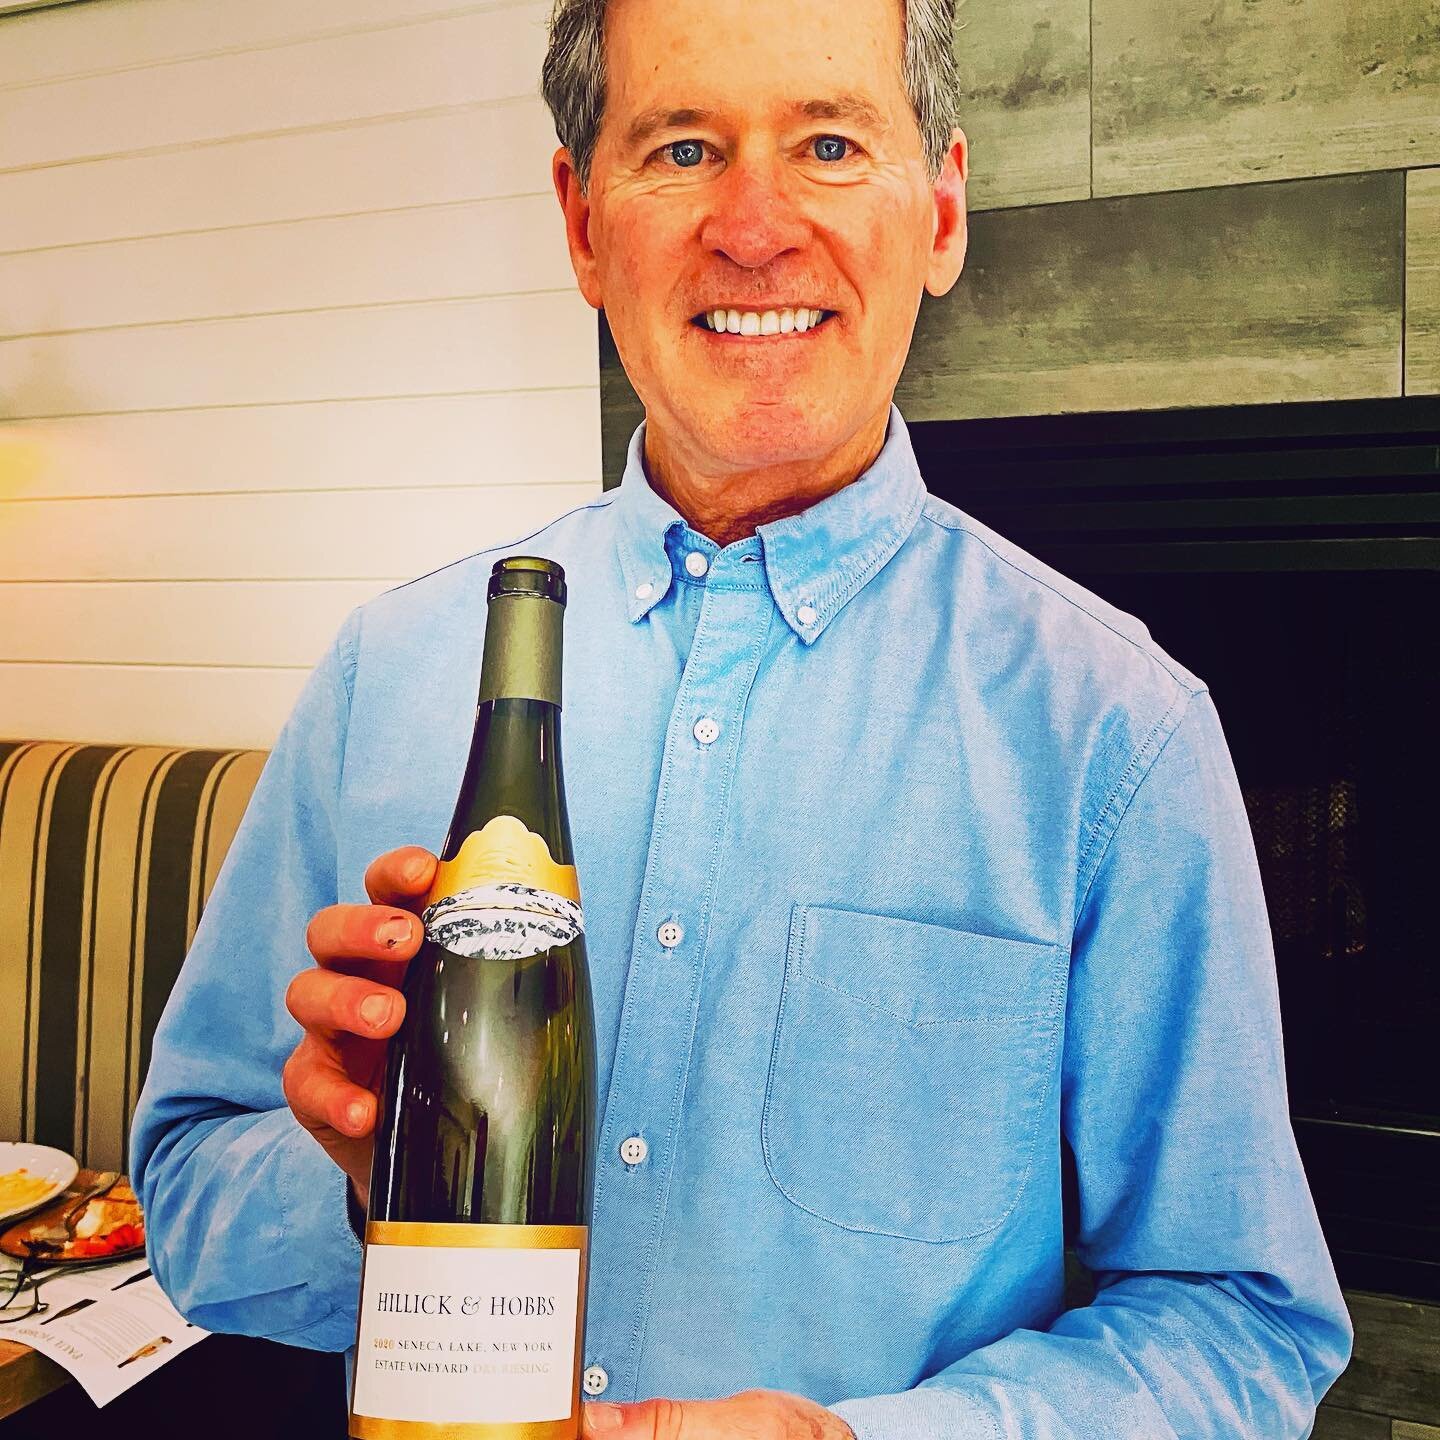 Meet the newest wine in Paul Hobbs impressive lineup. The @hillickandhobbs Riesling is named for his parents Joan Hillick and Edward Hobbs who raised their children on the family farm in Niagara County. 
After a wine career that has taken him to Arge